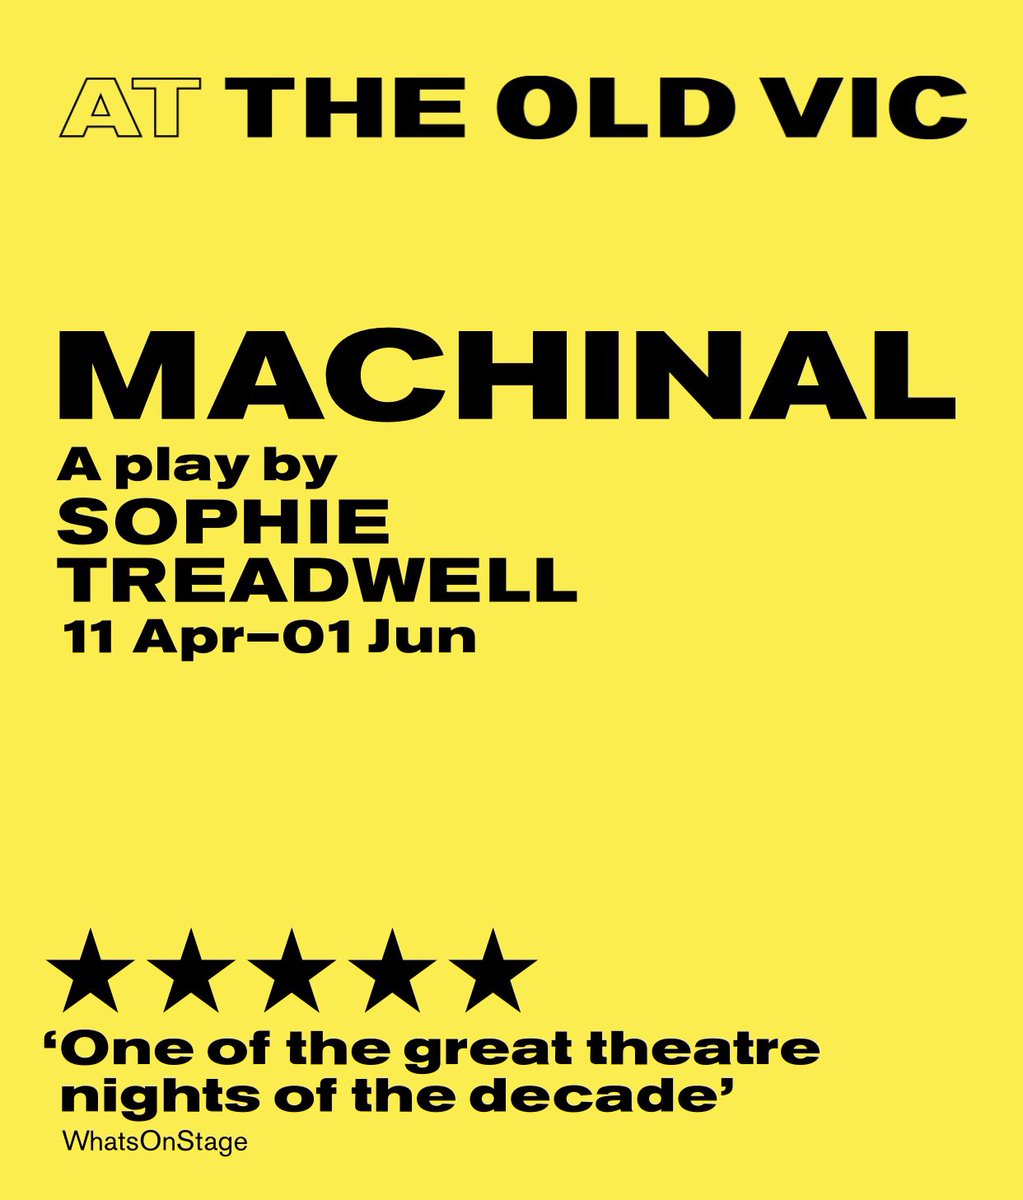 In a time of much discussion & anxiety surrounding THEATRE, it’s quality & its future, pause for a moment at Richard Jones' #Machinal @oldvictheatre. Here we have extraordinary ensemble theatre, stunning production values, & all in the name of 1 of the greatest plays of the C20.